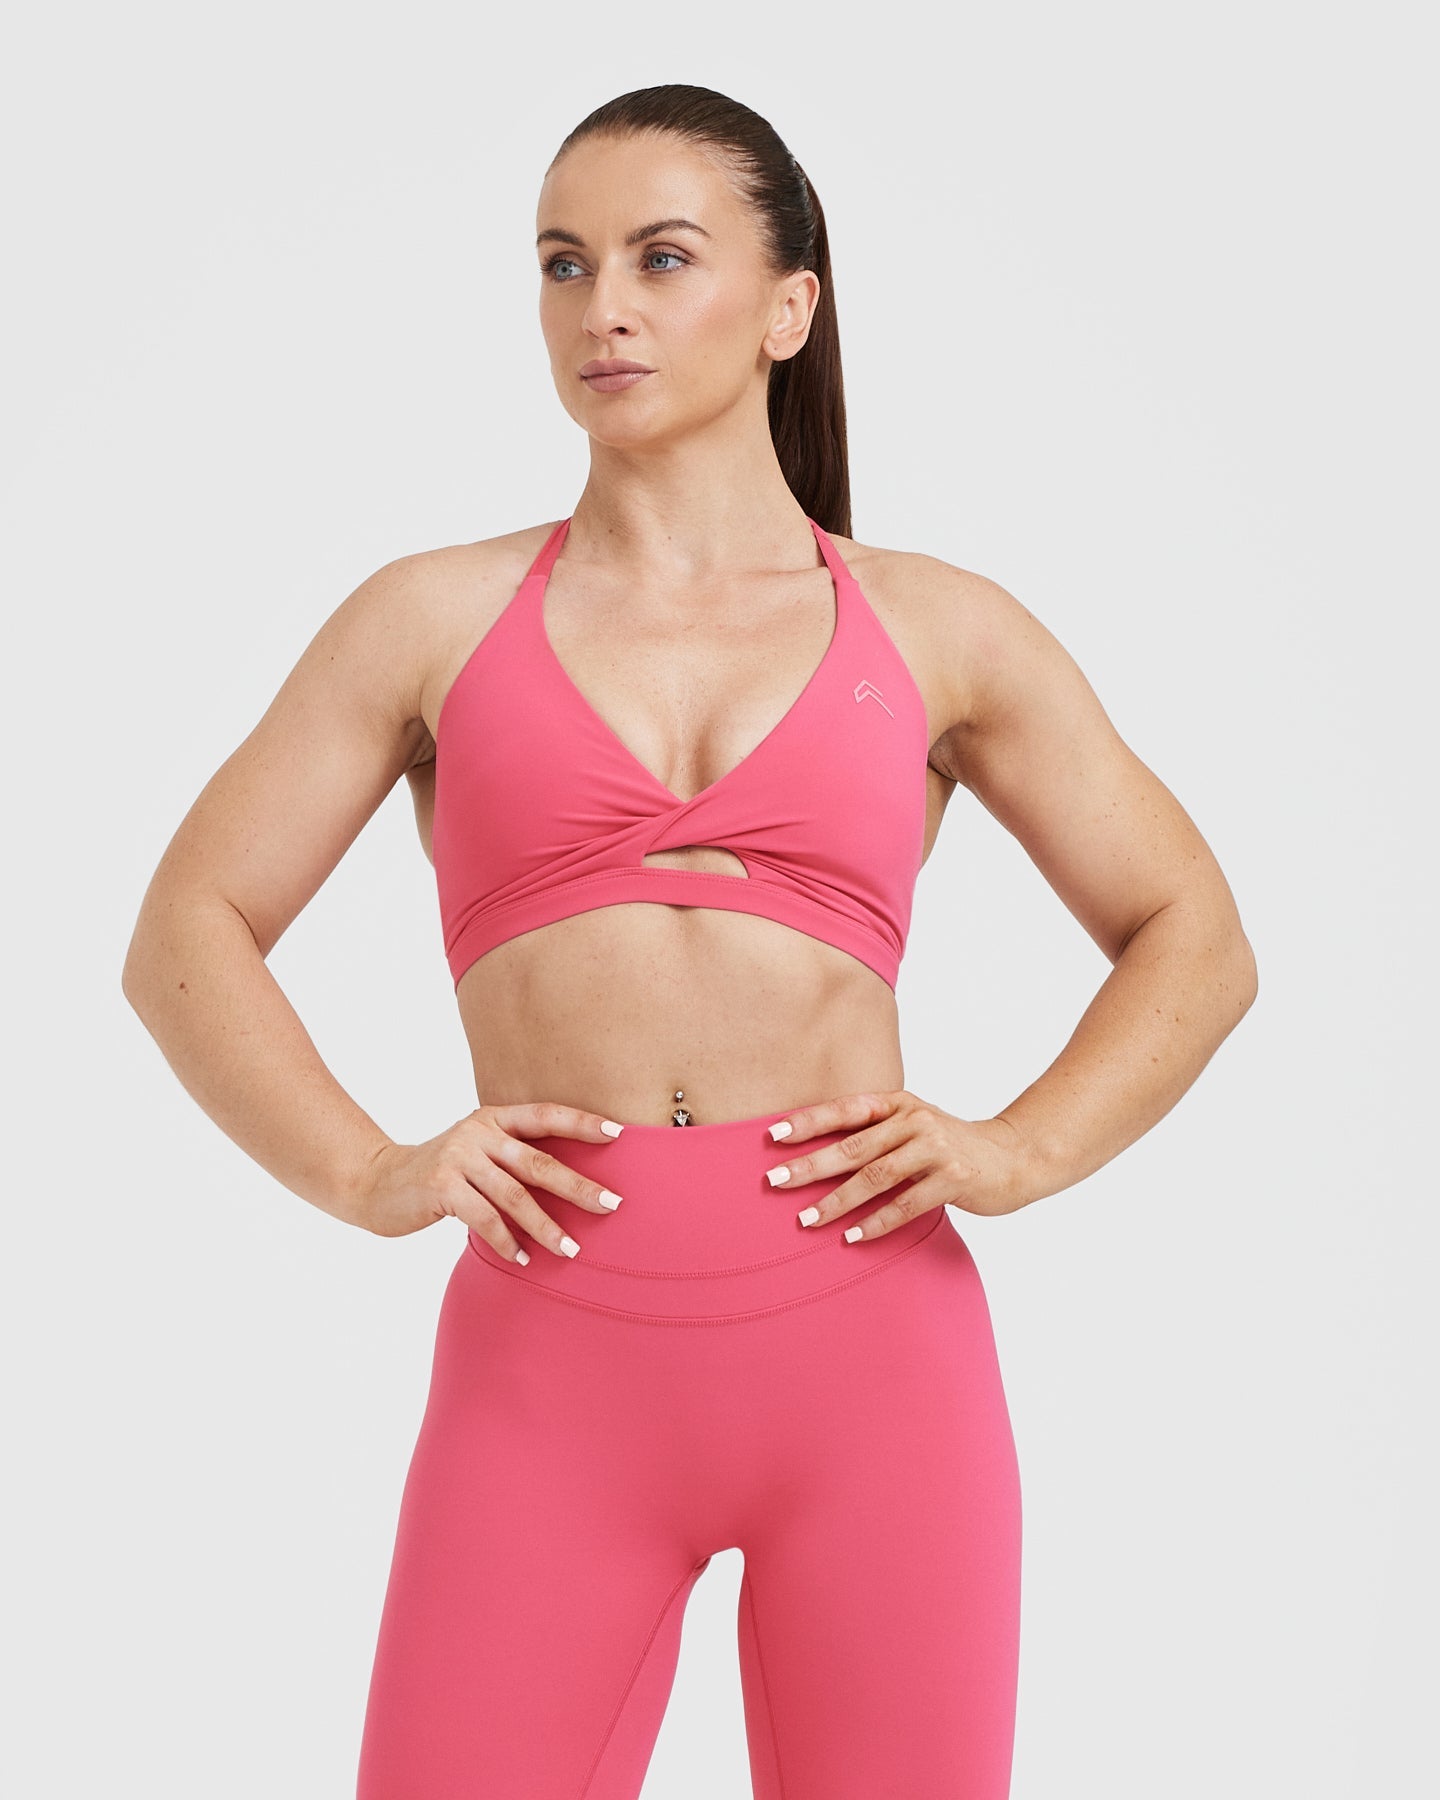 New 🌞 USA BRAND-NAME (Sport) PINK BRA 40H Authorized Reseller!